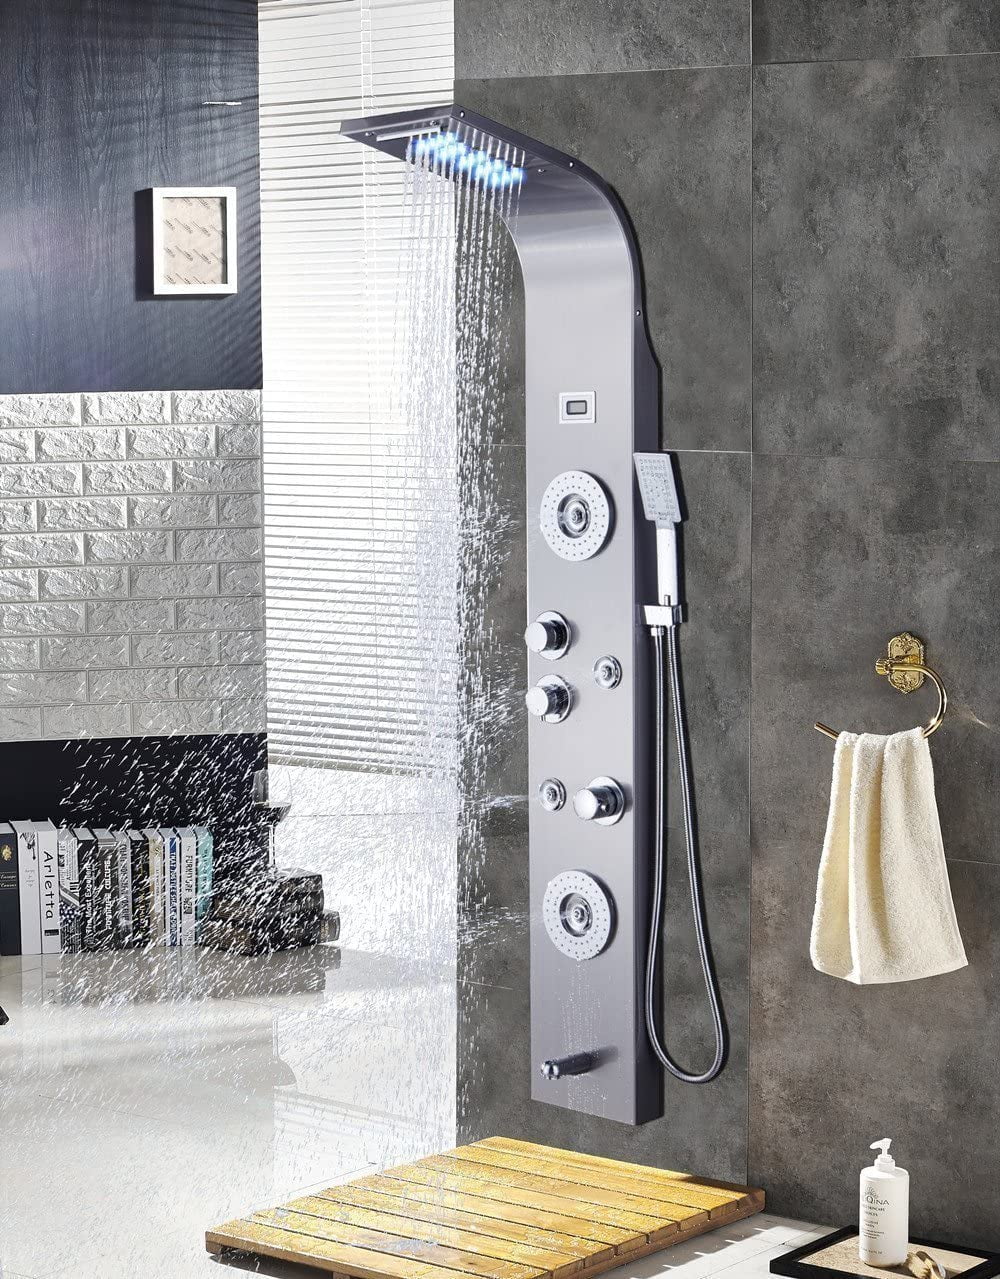 Brushed Nickel Shower Panel Tower Rainfall&Waterfall Massage Body System Jets 